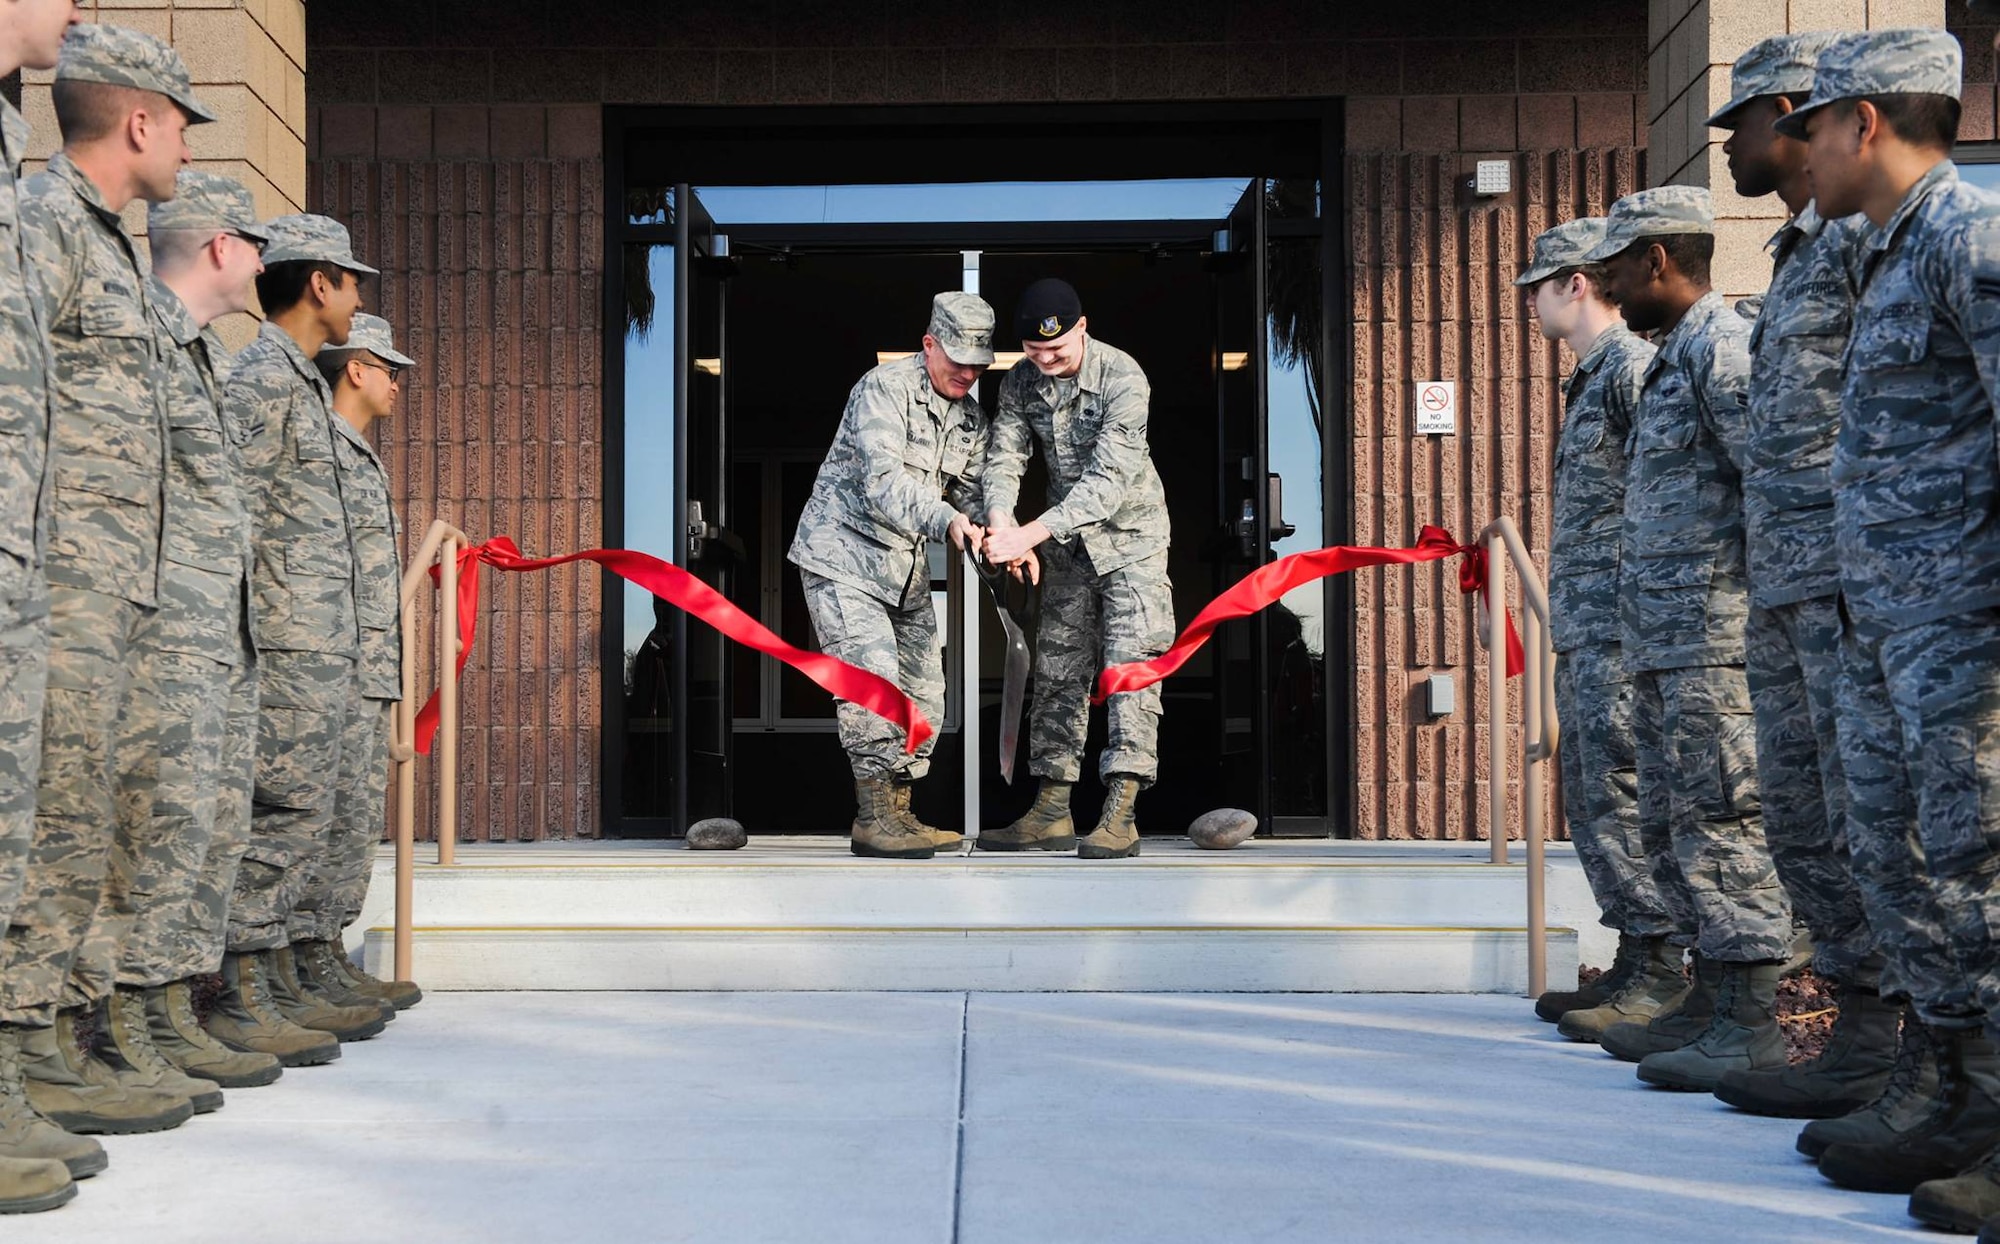 Col. Paul Murray, 99th Air Base Wing commander, and Airman 1st Class Nicholas Martini, 99th Security Forces Squadron, cut the ceremonial ribbon for the new dormitory during a ceremony on Nellis Air Force Base, Nev., Feb. 3, 2017. The new facility’s amenities include ample parking spaces, basketball court, sand volleyball court, and multiple shaded outdoor seating areas. (U.S. Air Force photo by Airman 1st Class Kevin Tanenbaum/Released)